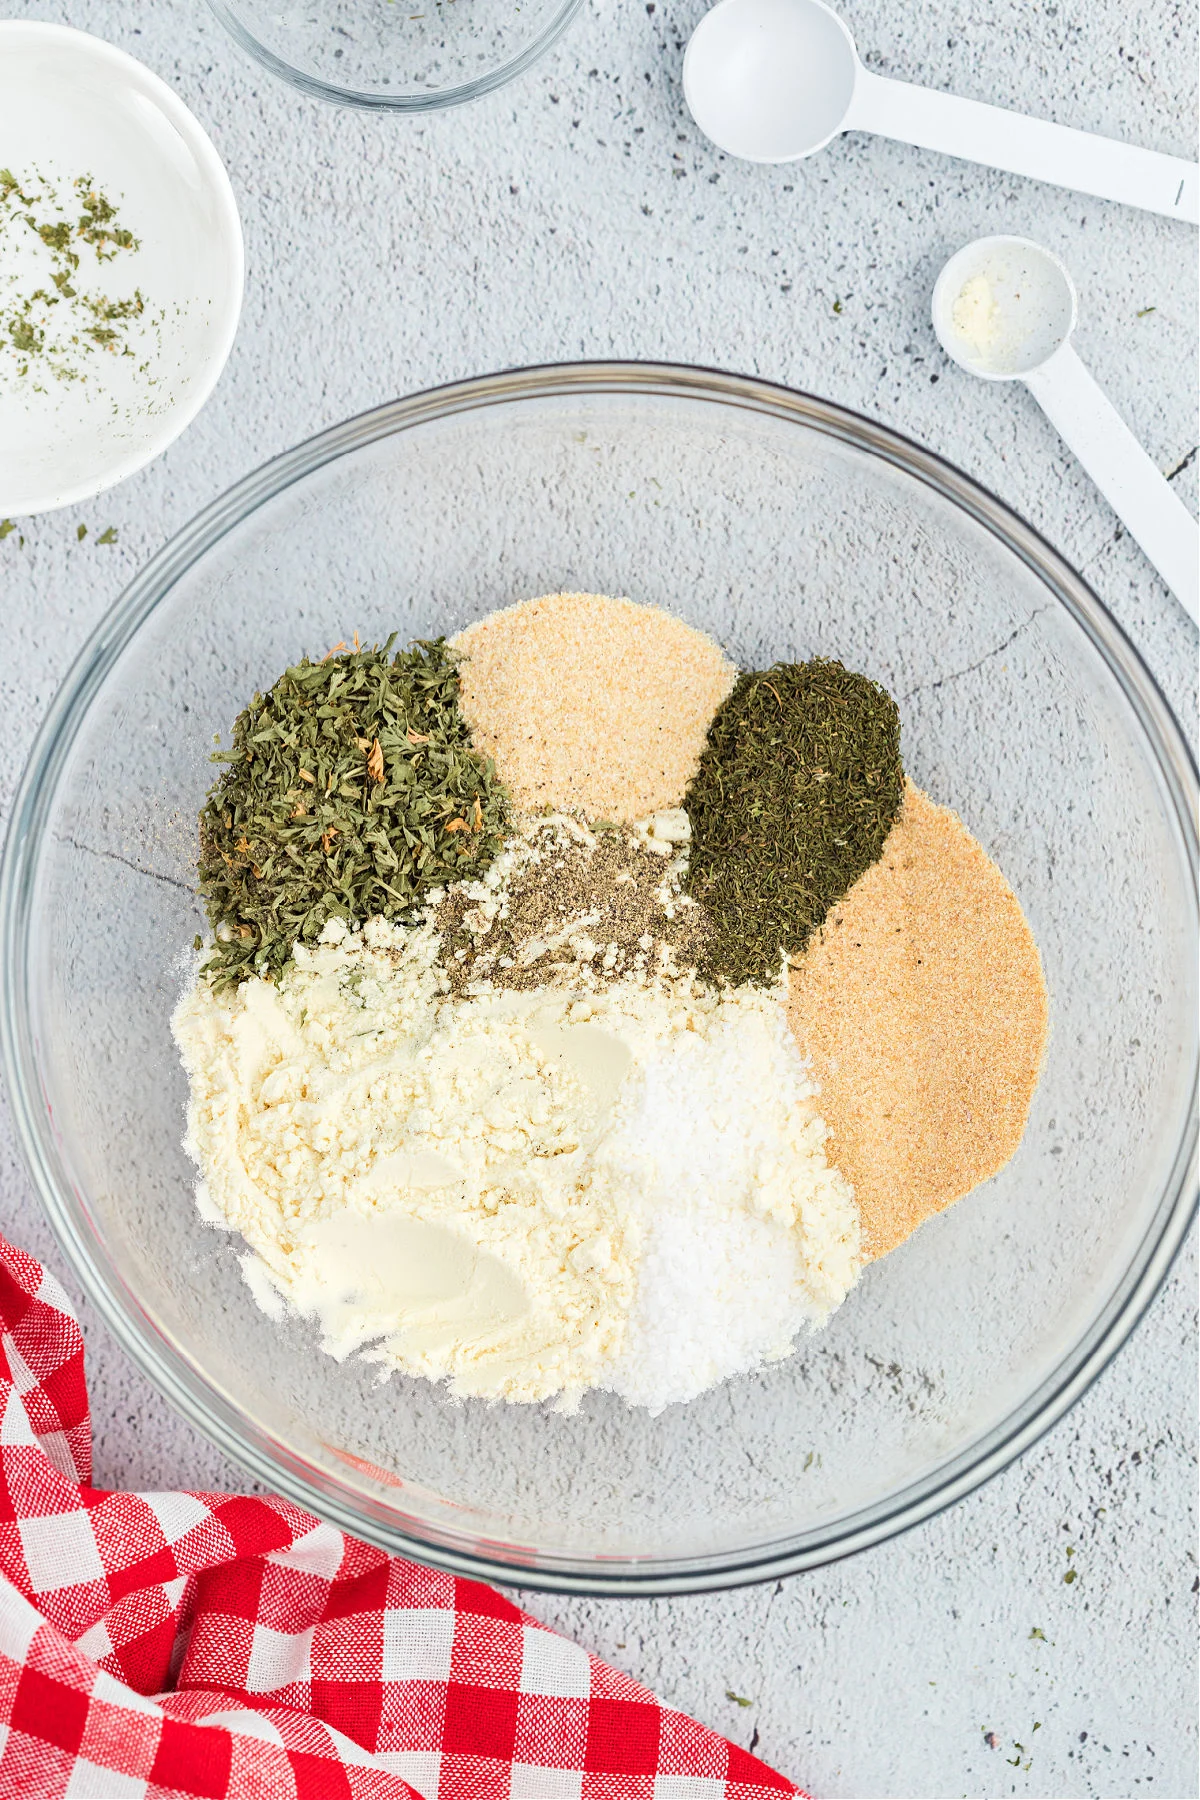 Seasonings for dry ranch dressing in a clear glass bowl.